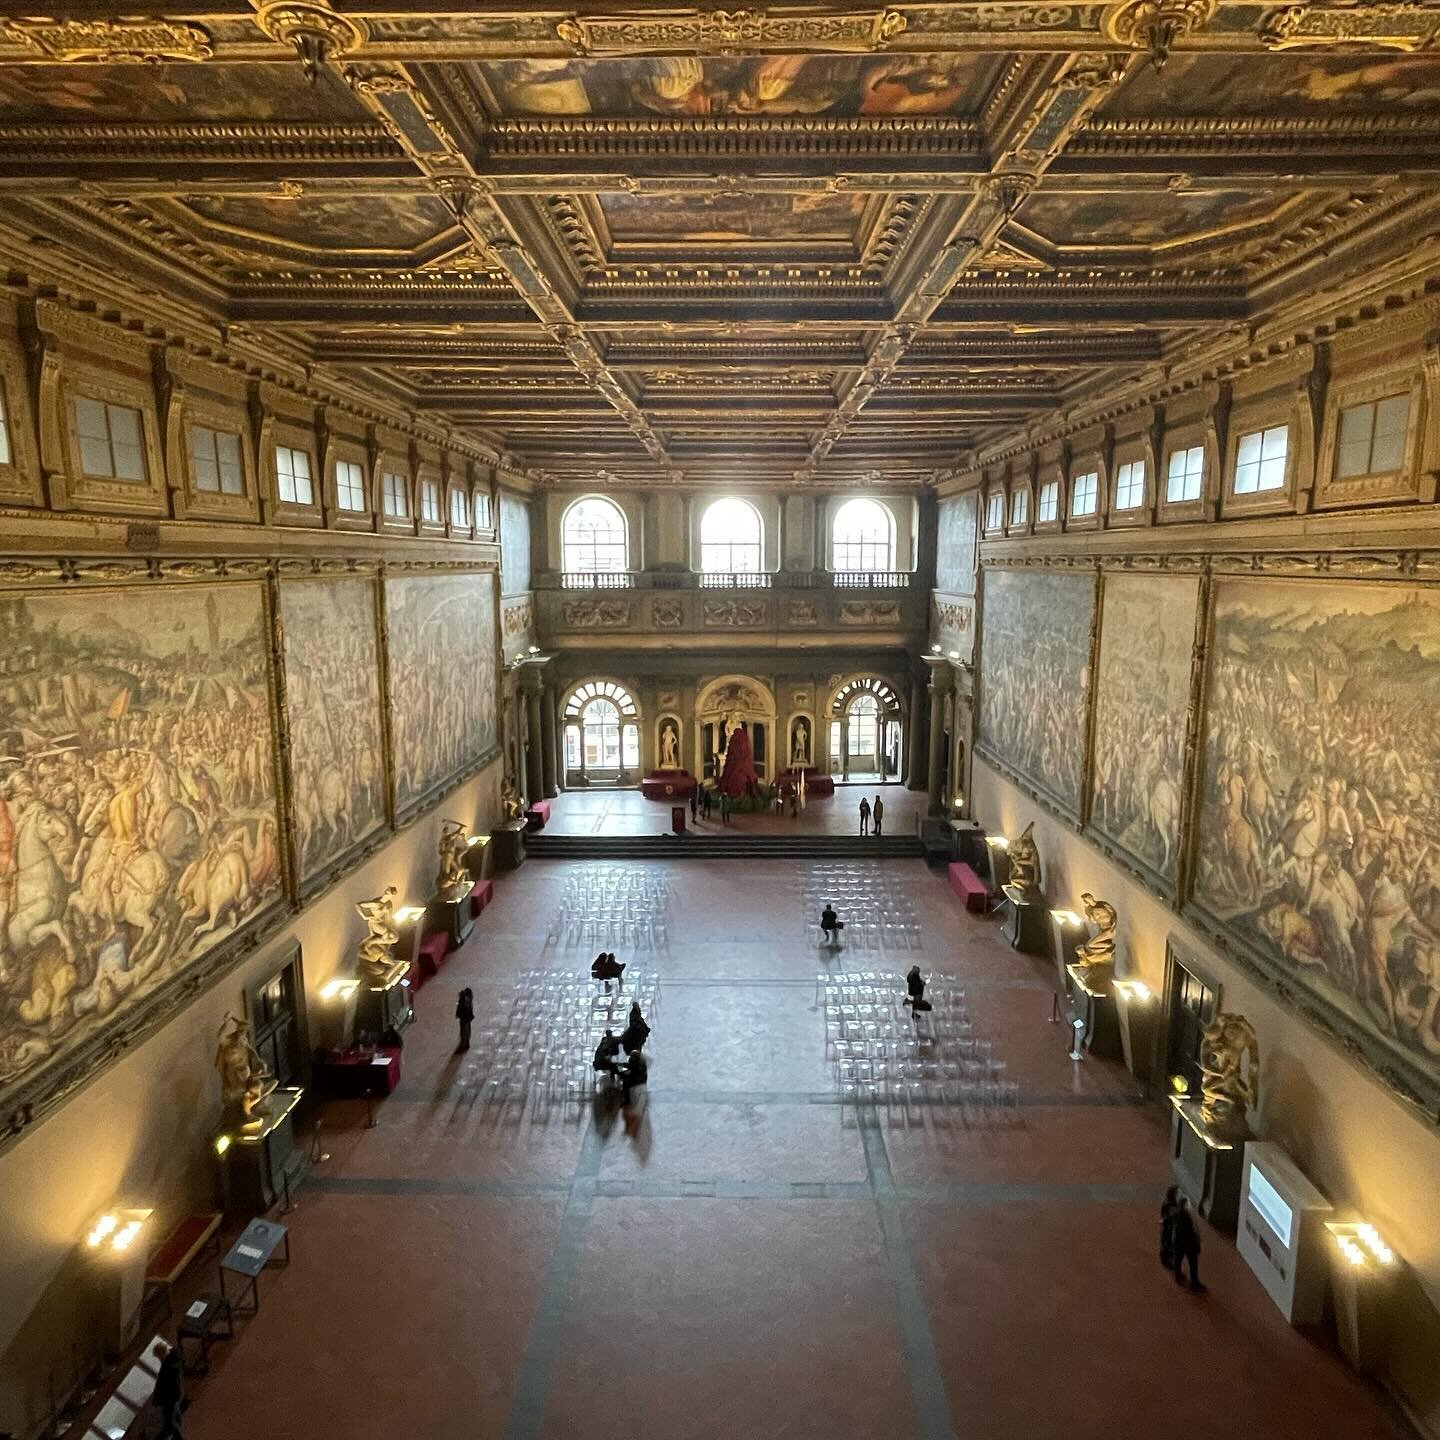 Today, we started our museum run, covering the Palazzo Vecchio, Casa di Dante, Fondazione Zeffirelli, Museo di Anthropologia &amp; Bargello Museum. 

Tomorrow, we&lsquo;ll finally get to see the Uffizi Gallery, which is my top goal on the bucket list